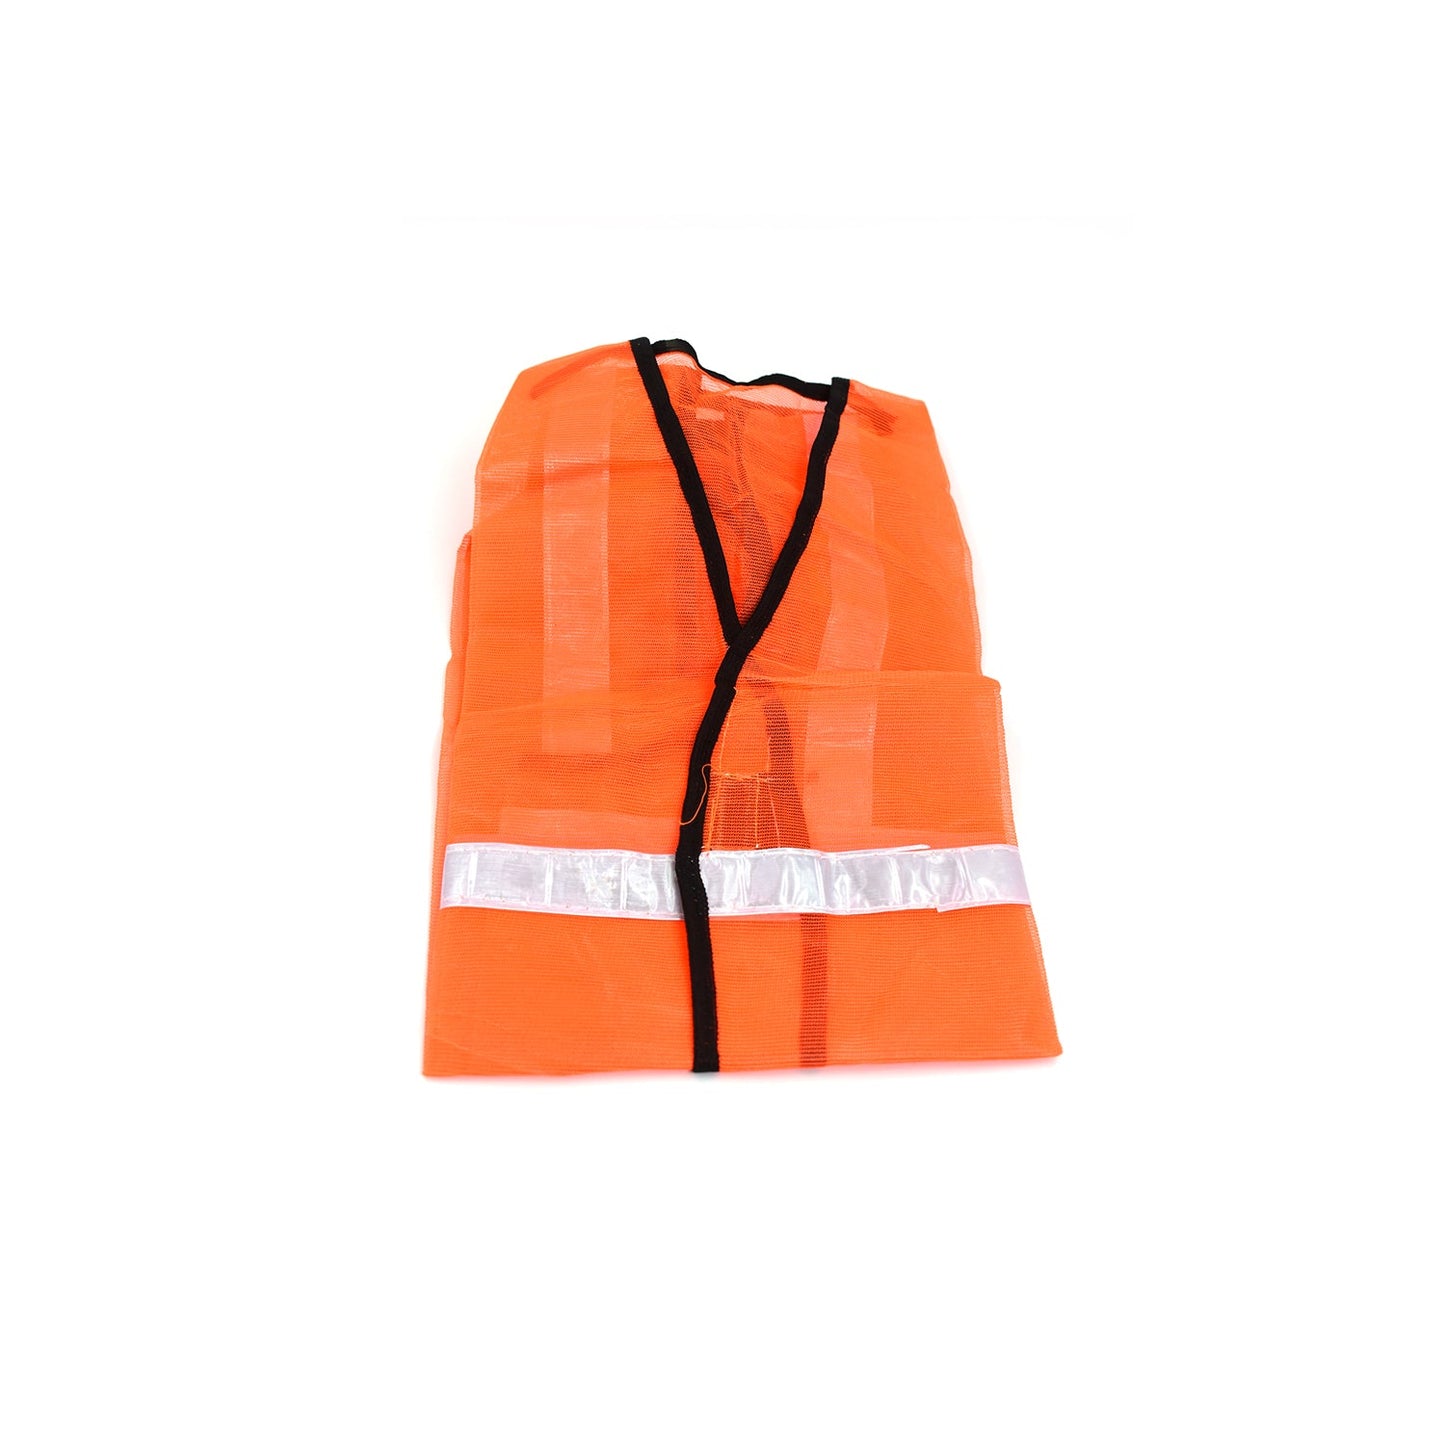 7438 Orange Safety Jacket For Having protection against accidents usually in construction area's. 